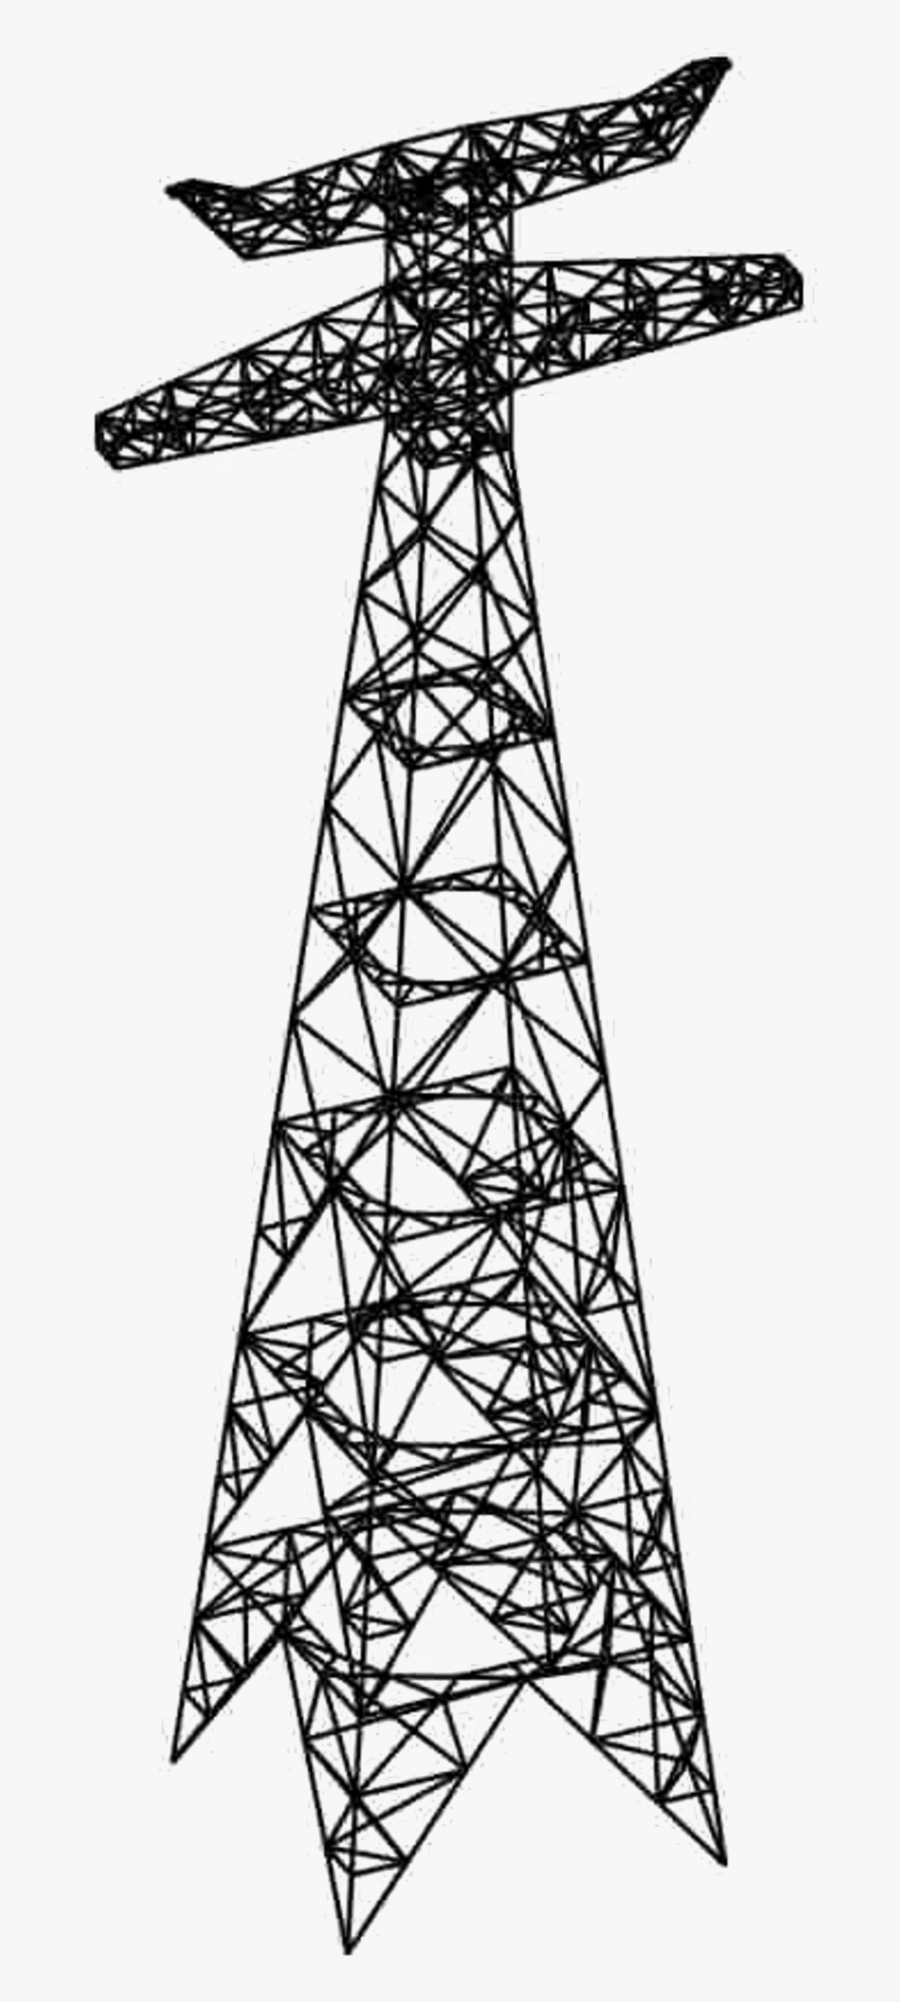 Example Of Tower Model, Transparent Clipart